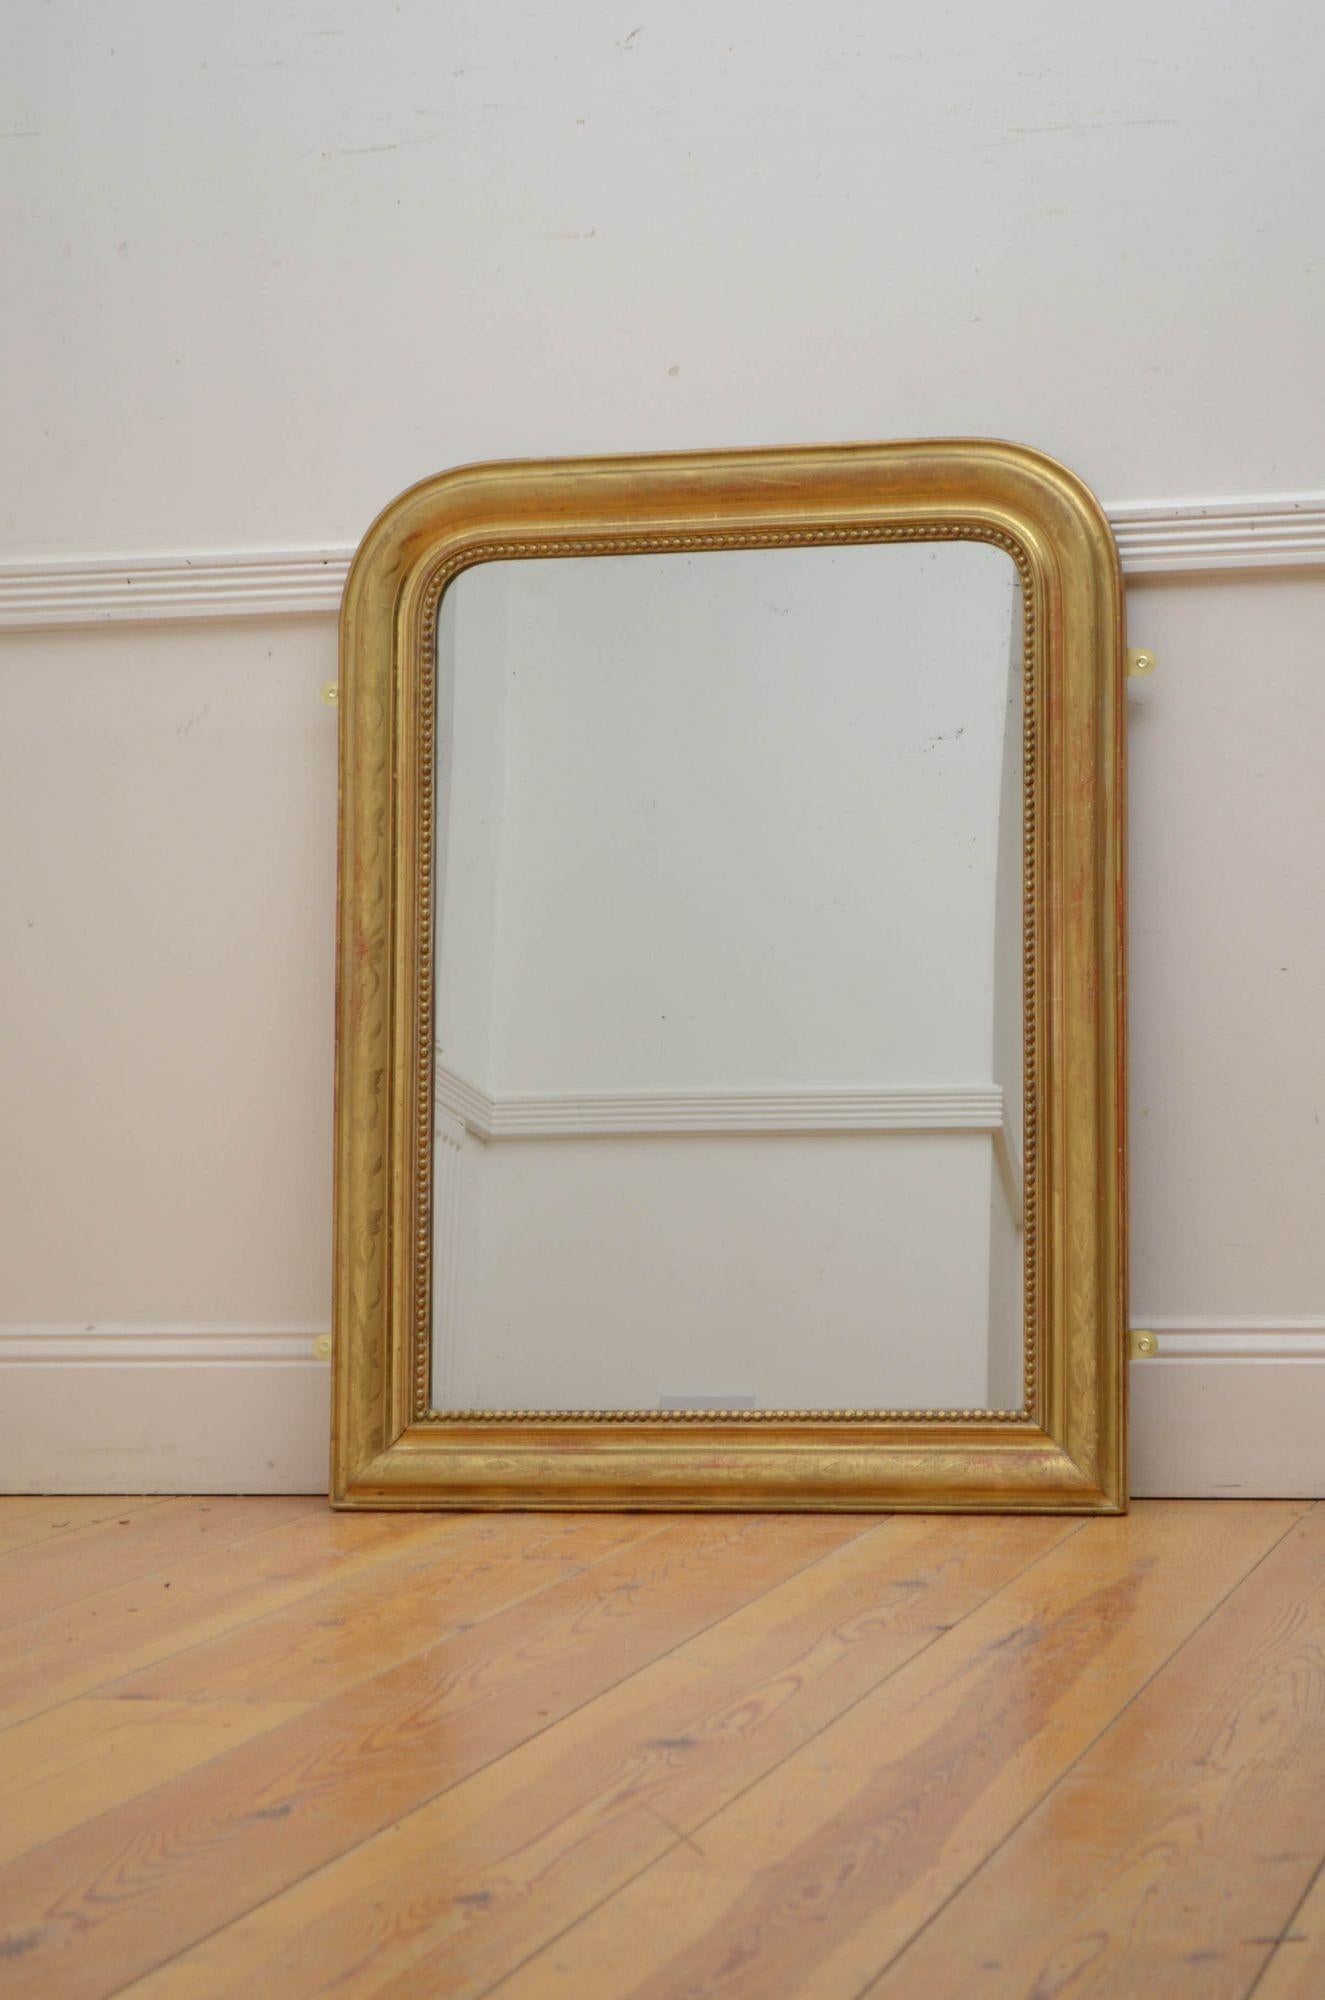 Sn5480 Attractive XIXth century gilt wall or pier mirror, having original glass with some imperfections in beaded and moulded frame with etched floral decoration. This antique mirror retains original gilt, glass and backboards, all in home ready